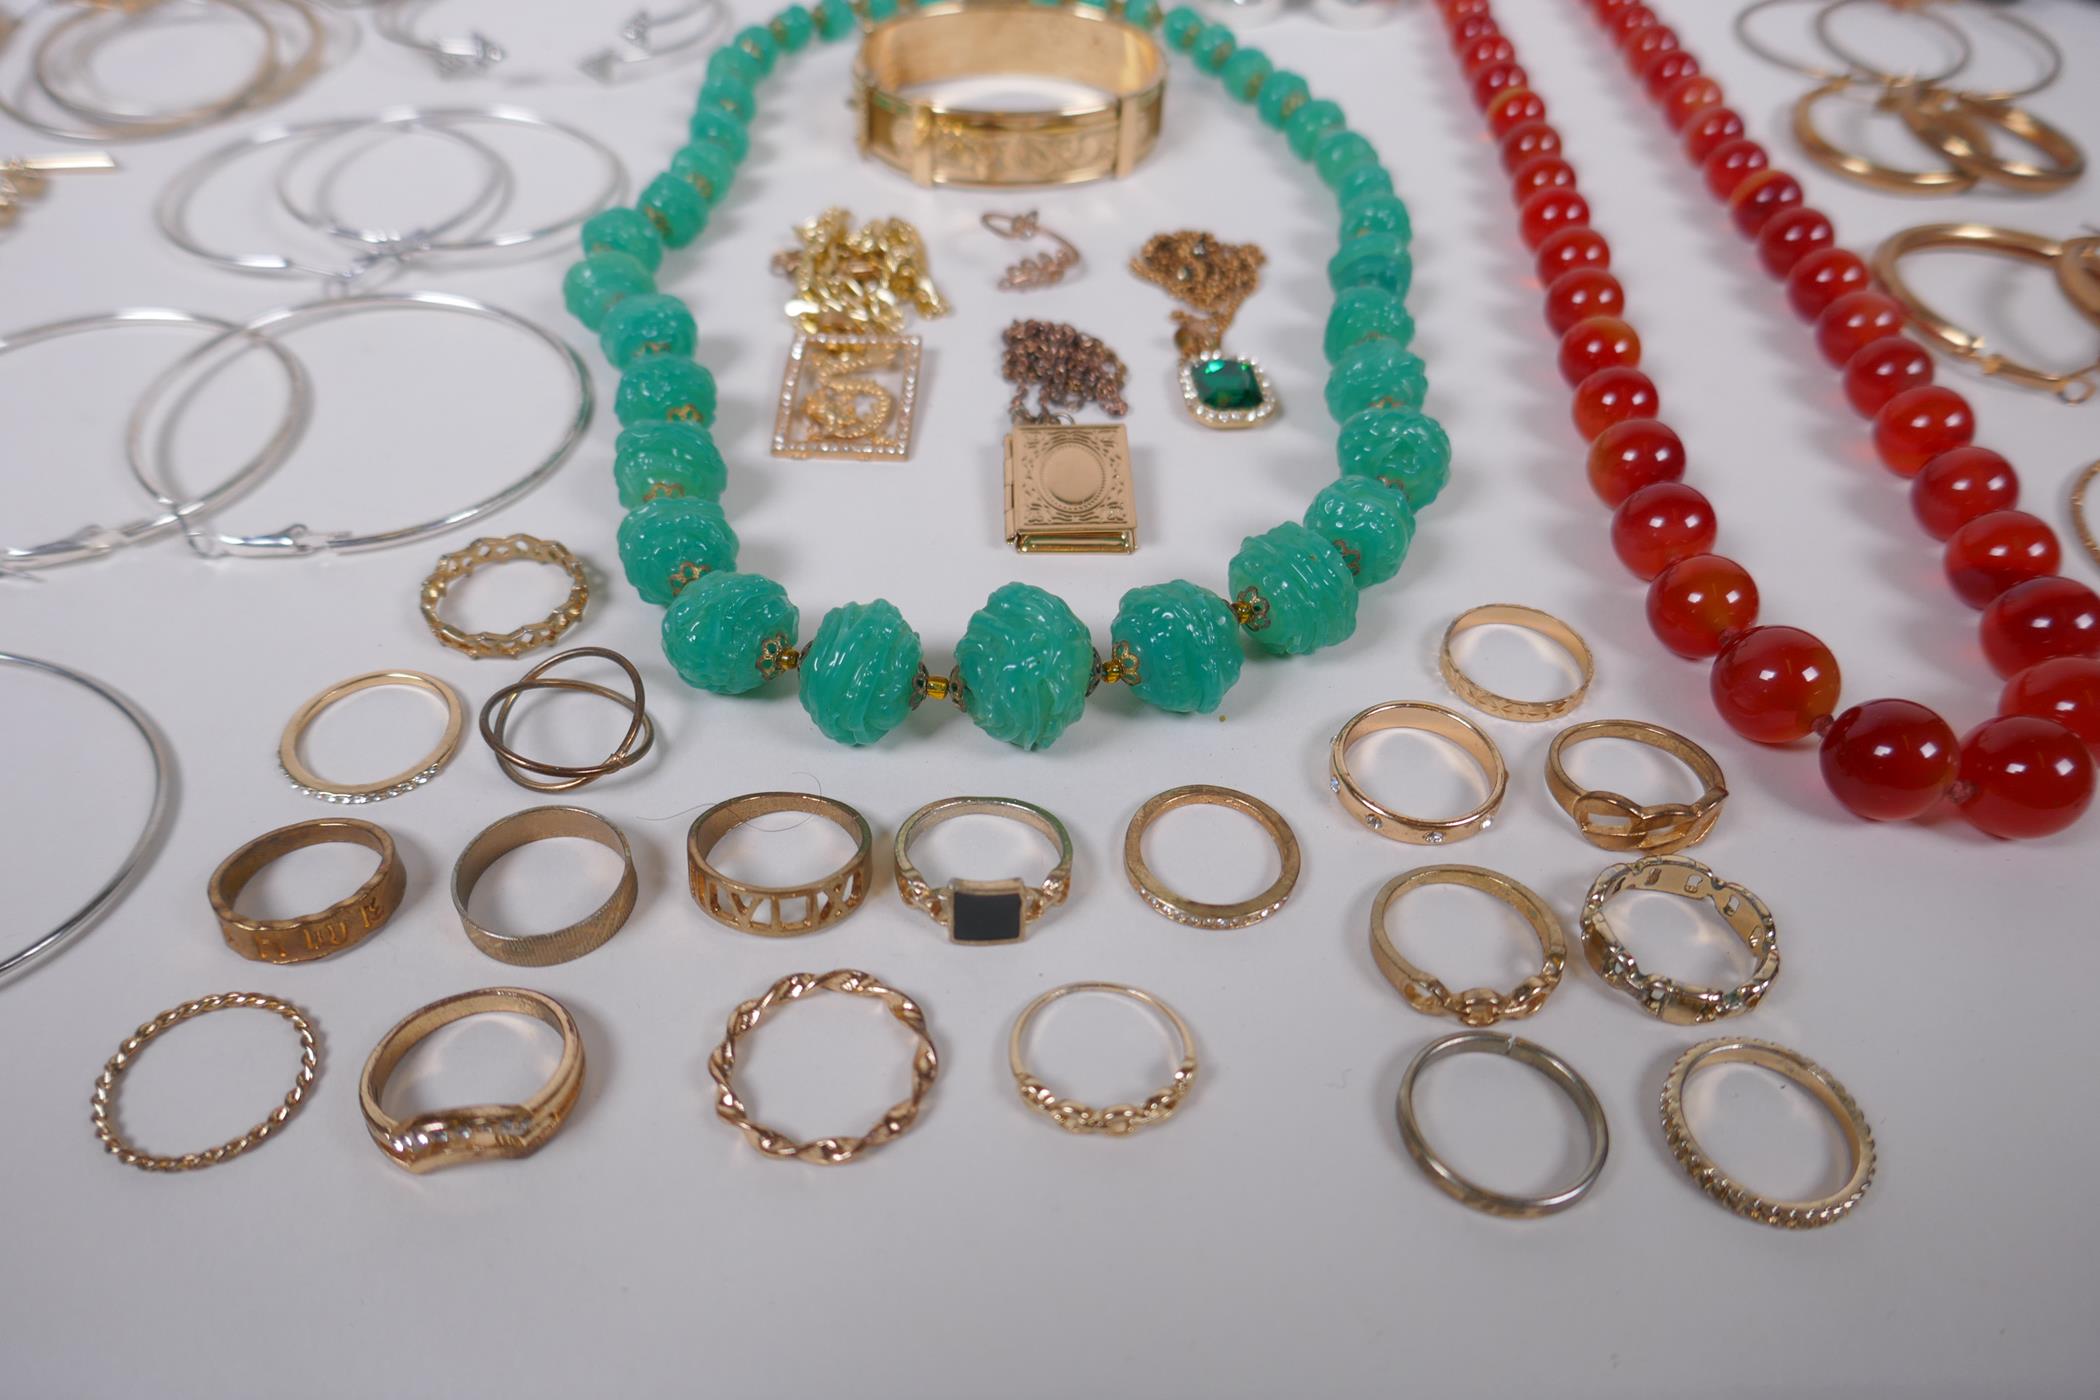 A quantity of vintage costume jewellery including a tiara, bangles, necklaces etc, together with a - Image 4 of 9